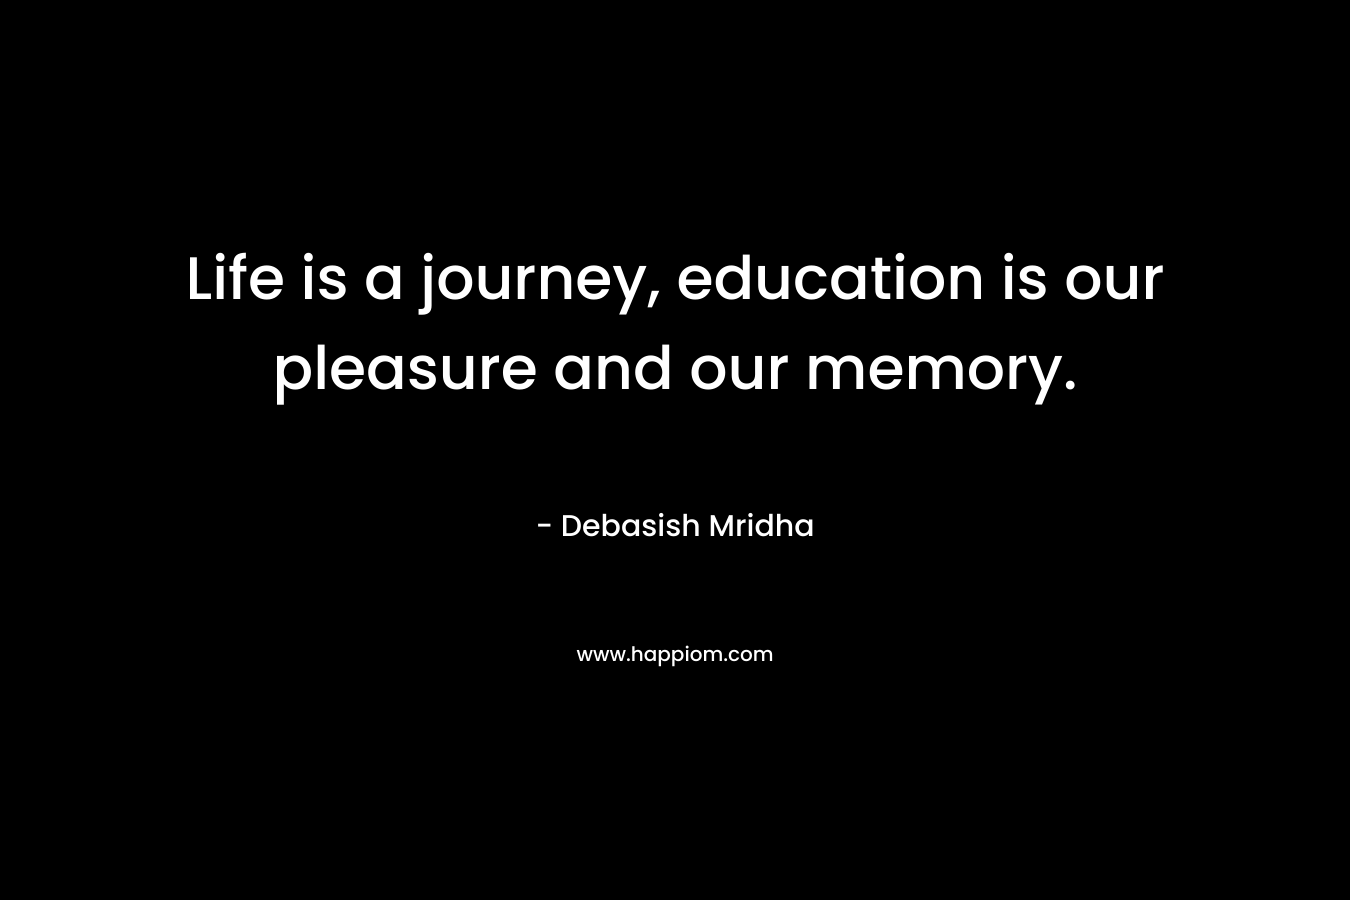 Life is a journey, education is our pleasure and our memory.